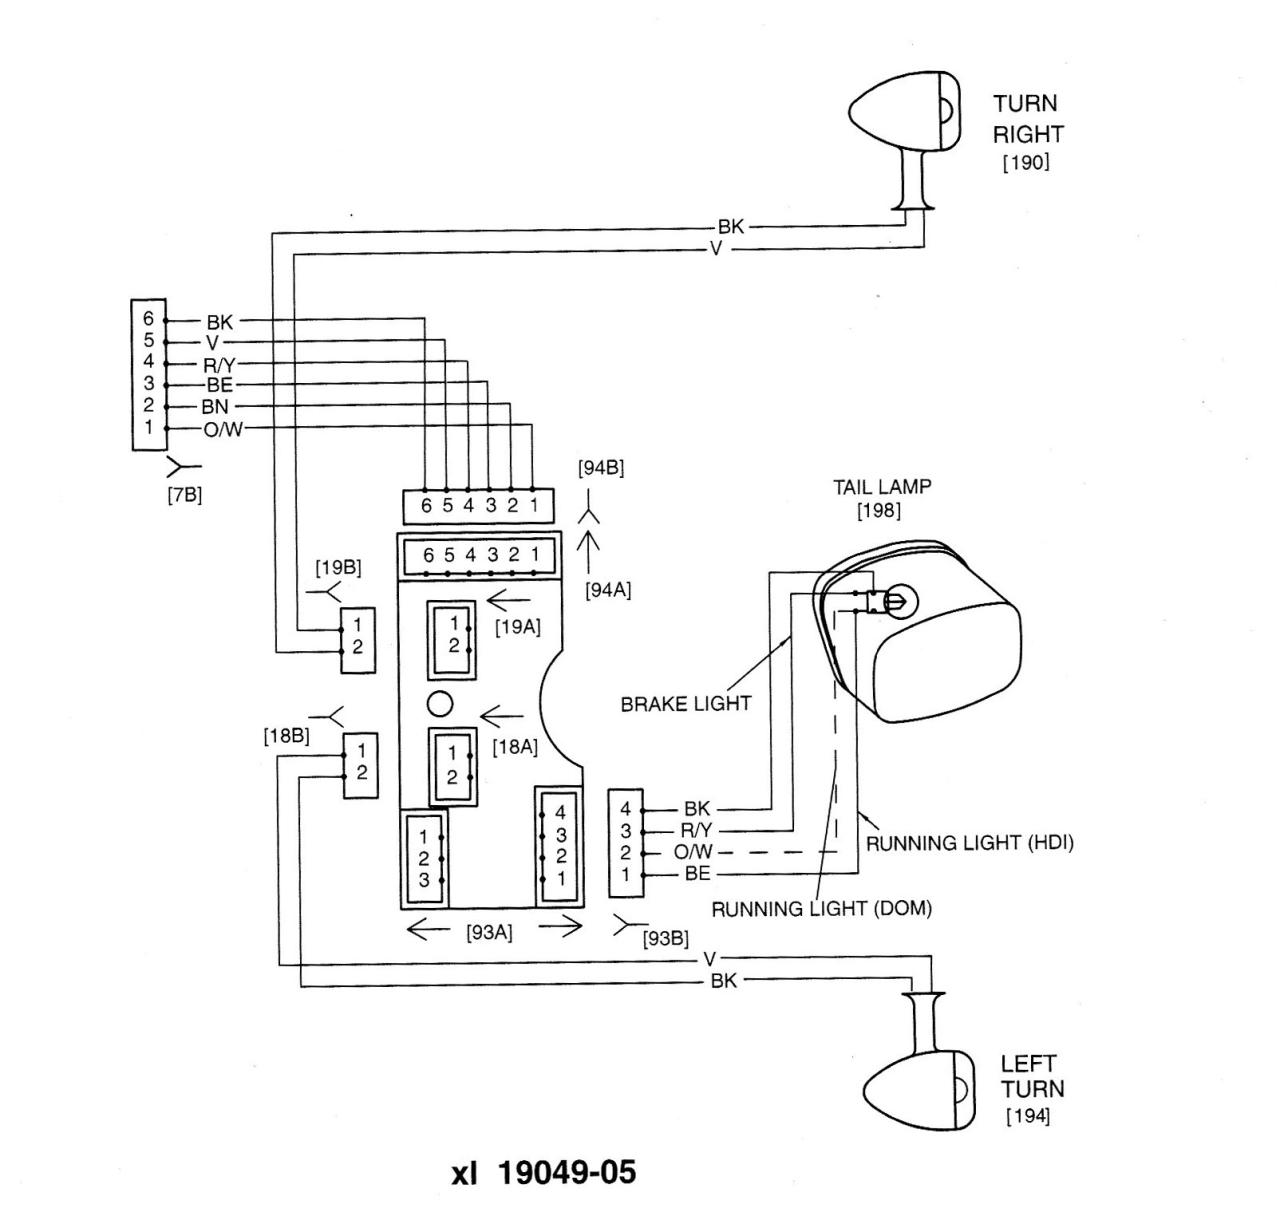 2020 Street Glide Tail Light Wiring Diagram Wiring View and